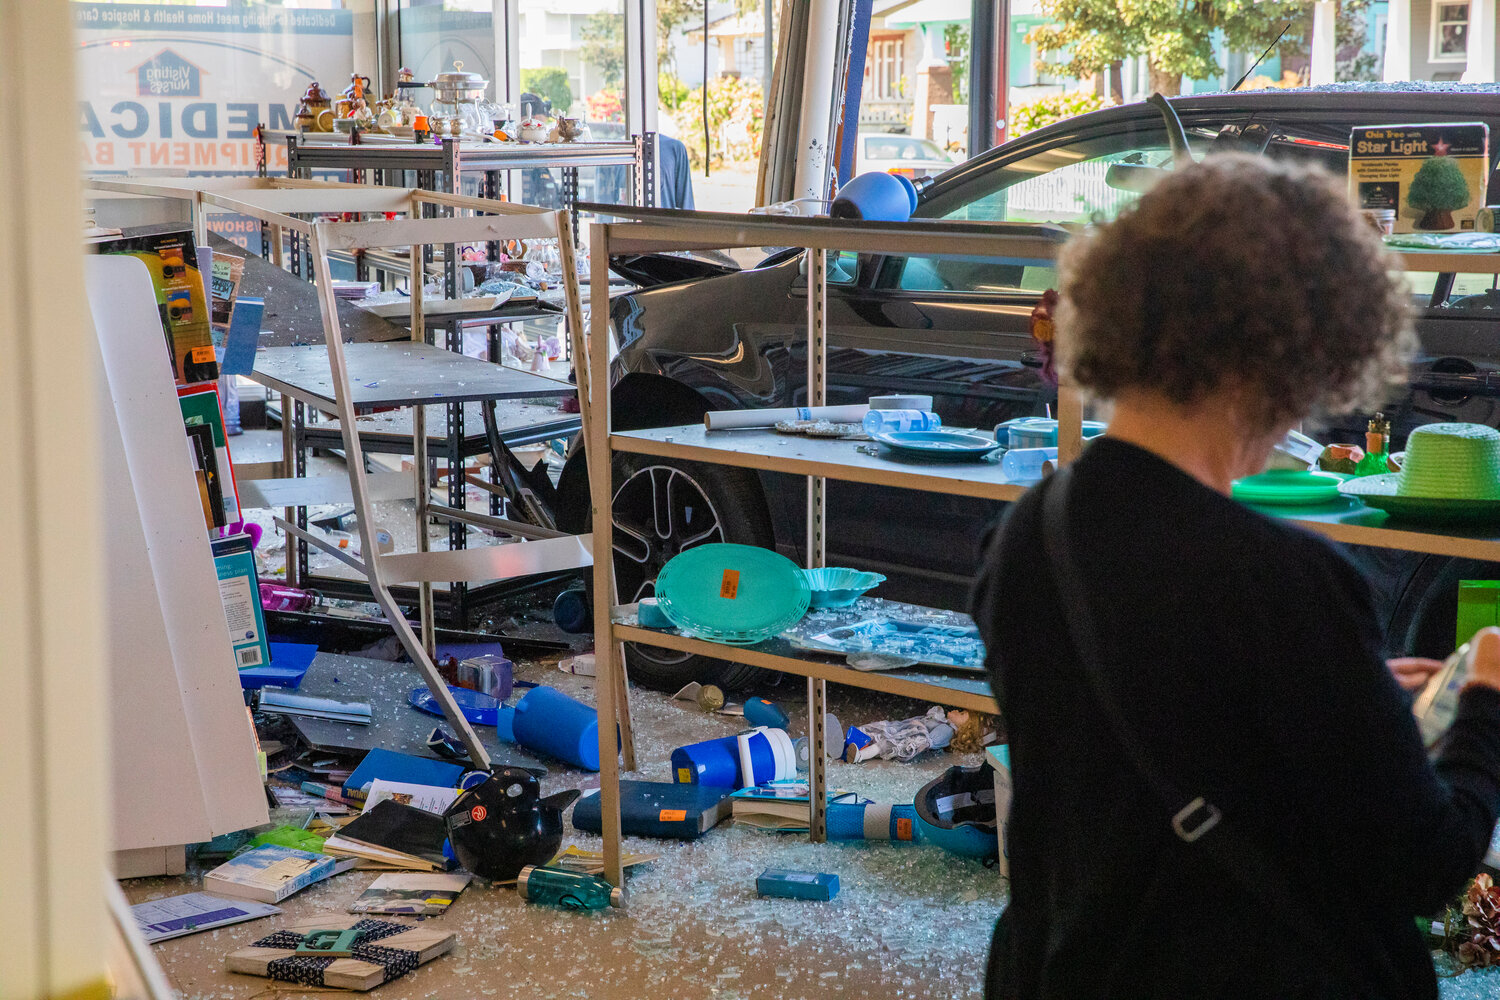 Damaged is assessed at Visiting Nurses in Centralia after a vehicle crashed through windows, destroying shelves full of items at the location Thursday morning.